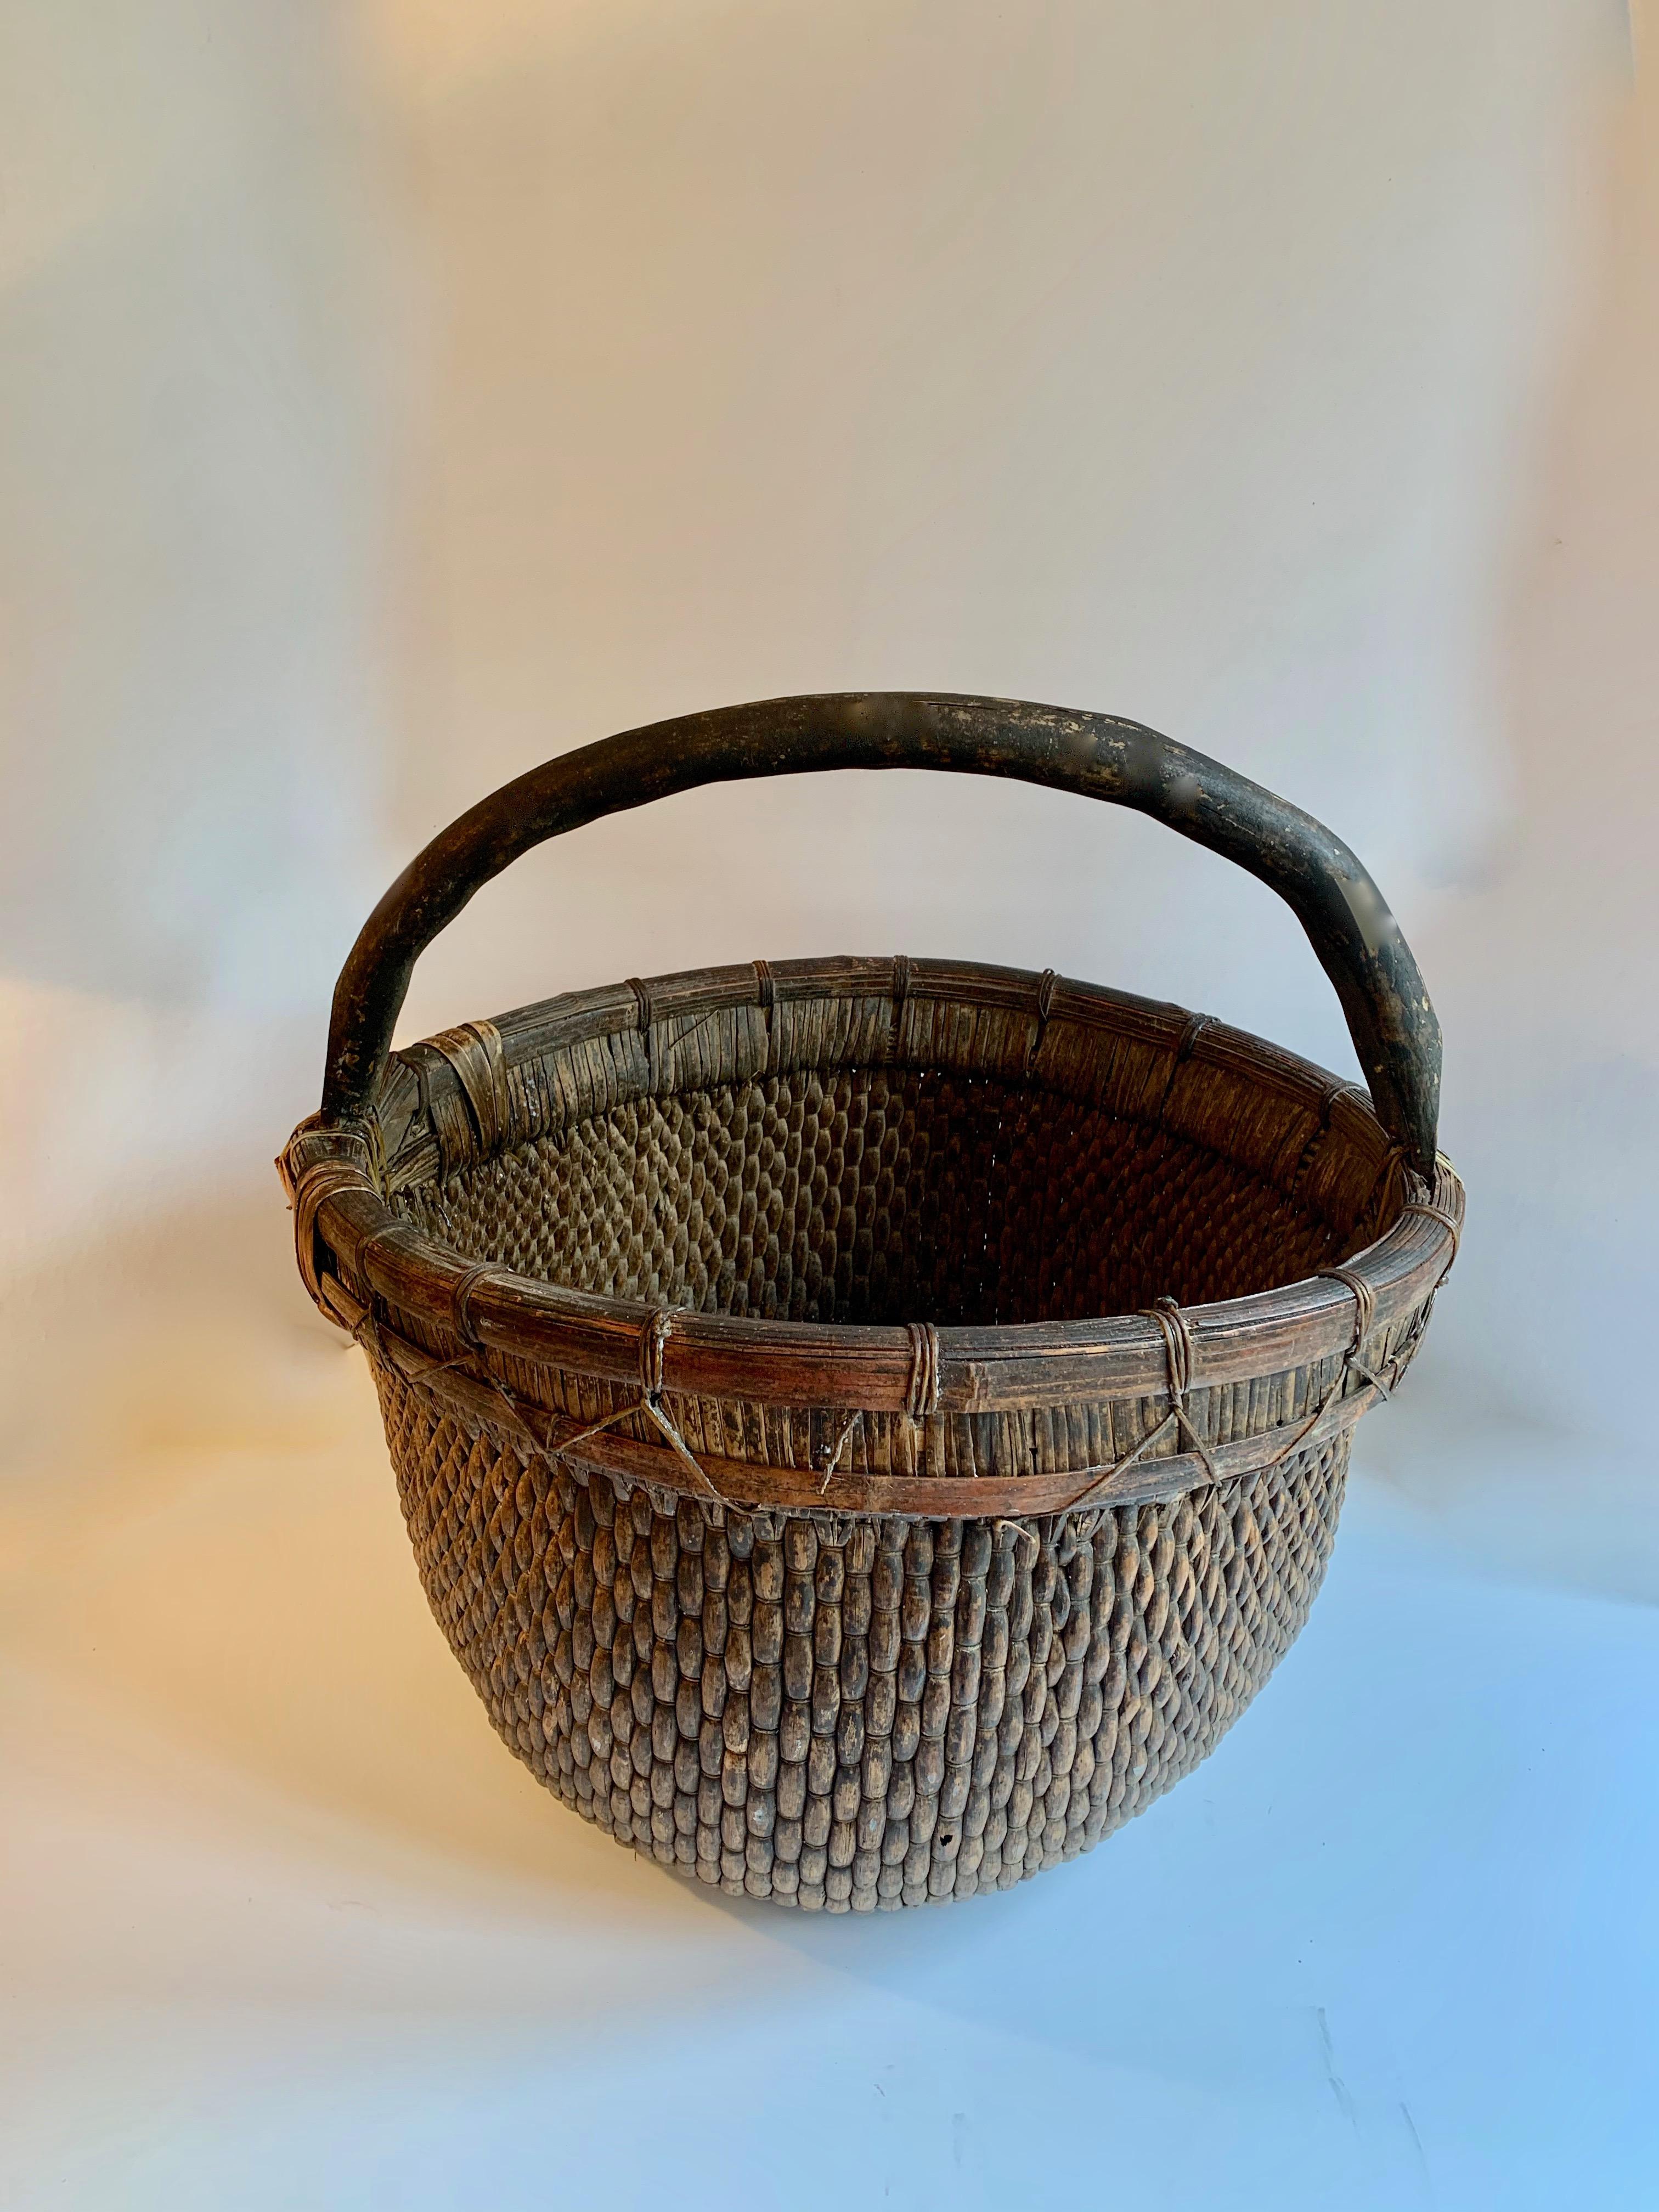 woven baskets with handles